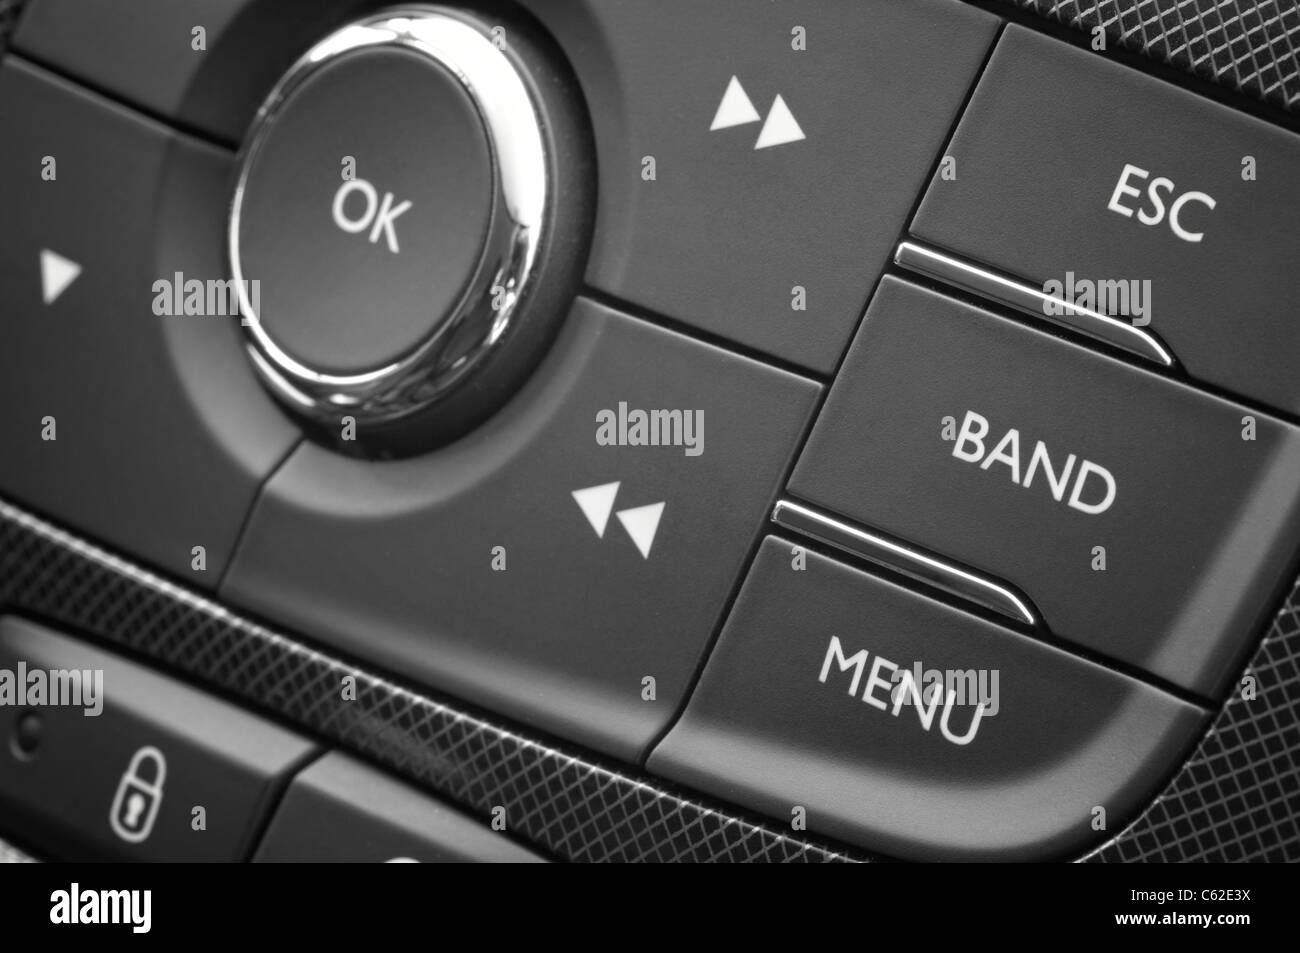 Close up of an modern automotive dashboard with control buttons Stock Photo